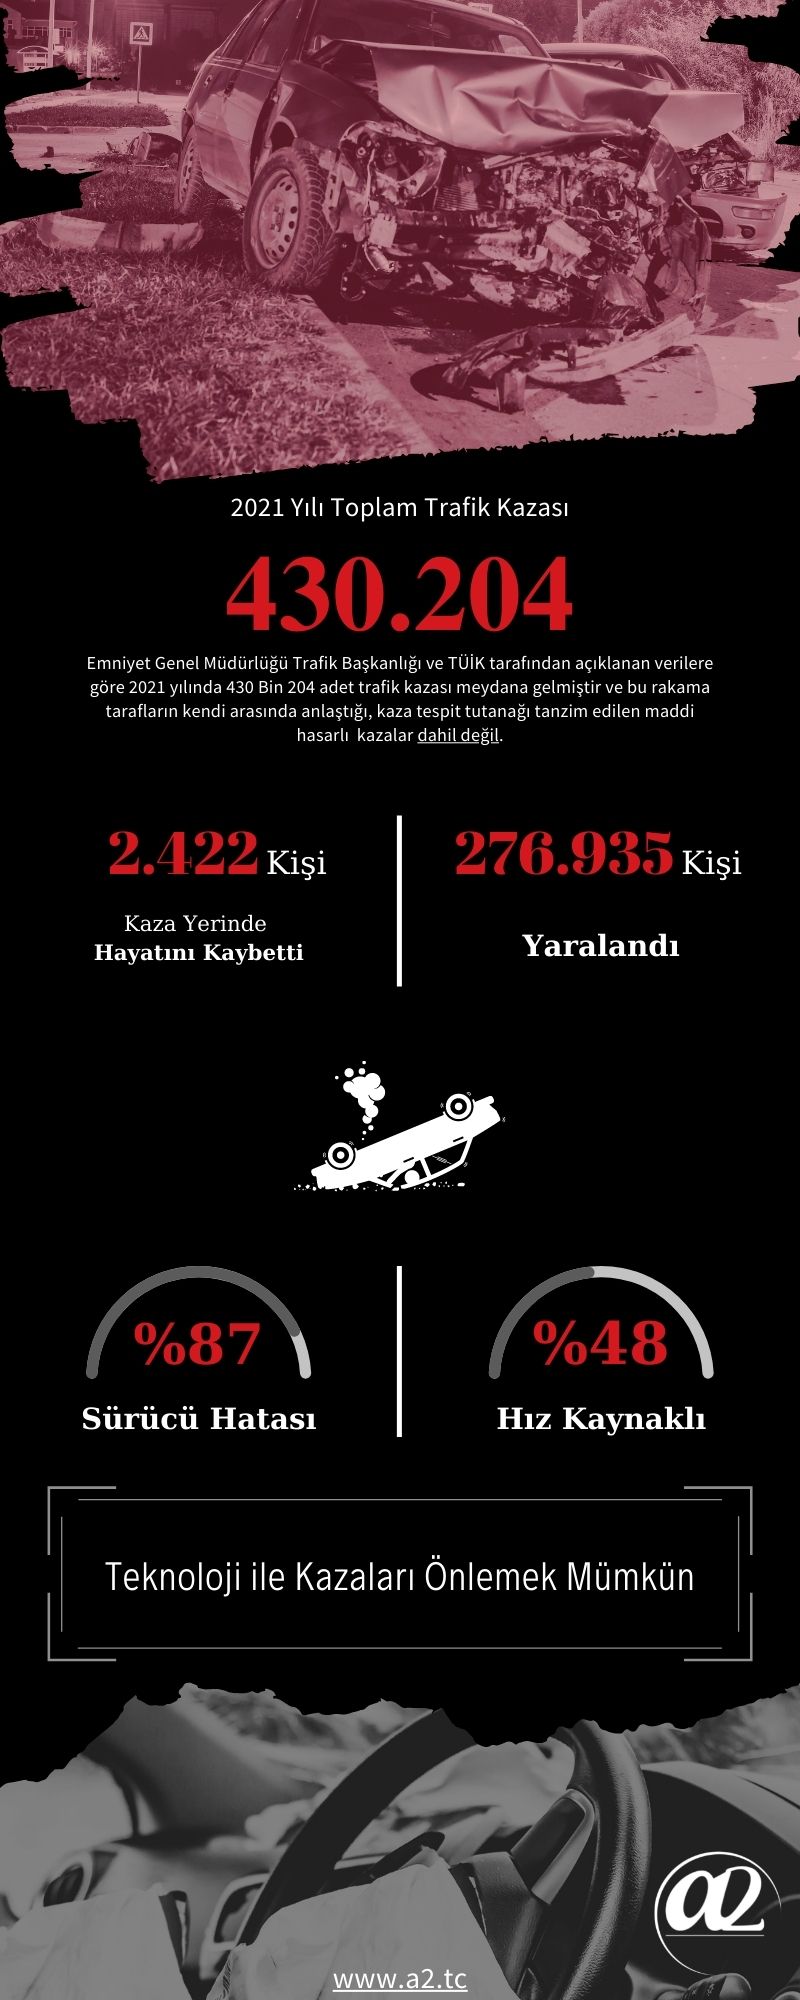 Infographic 2021 Traffic Accidents in Turkey